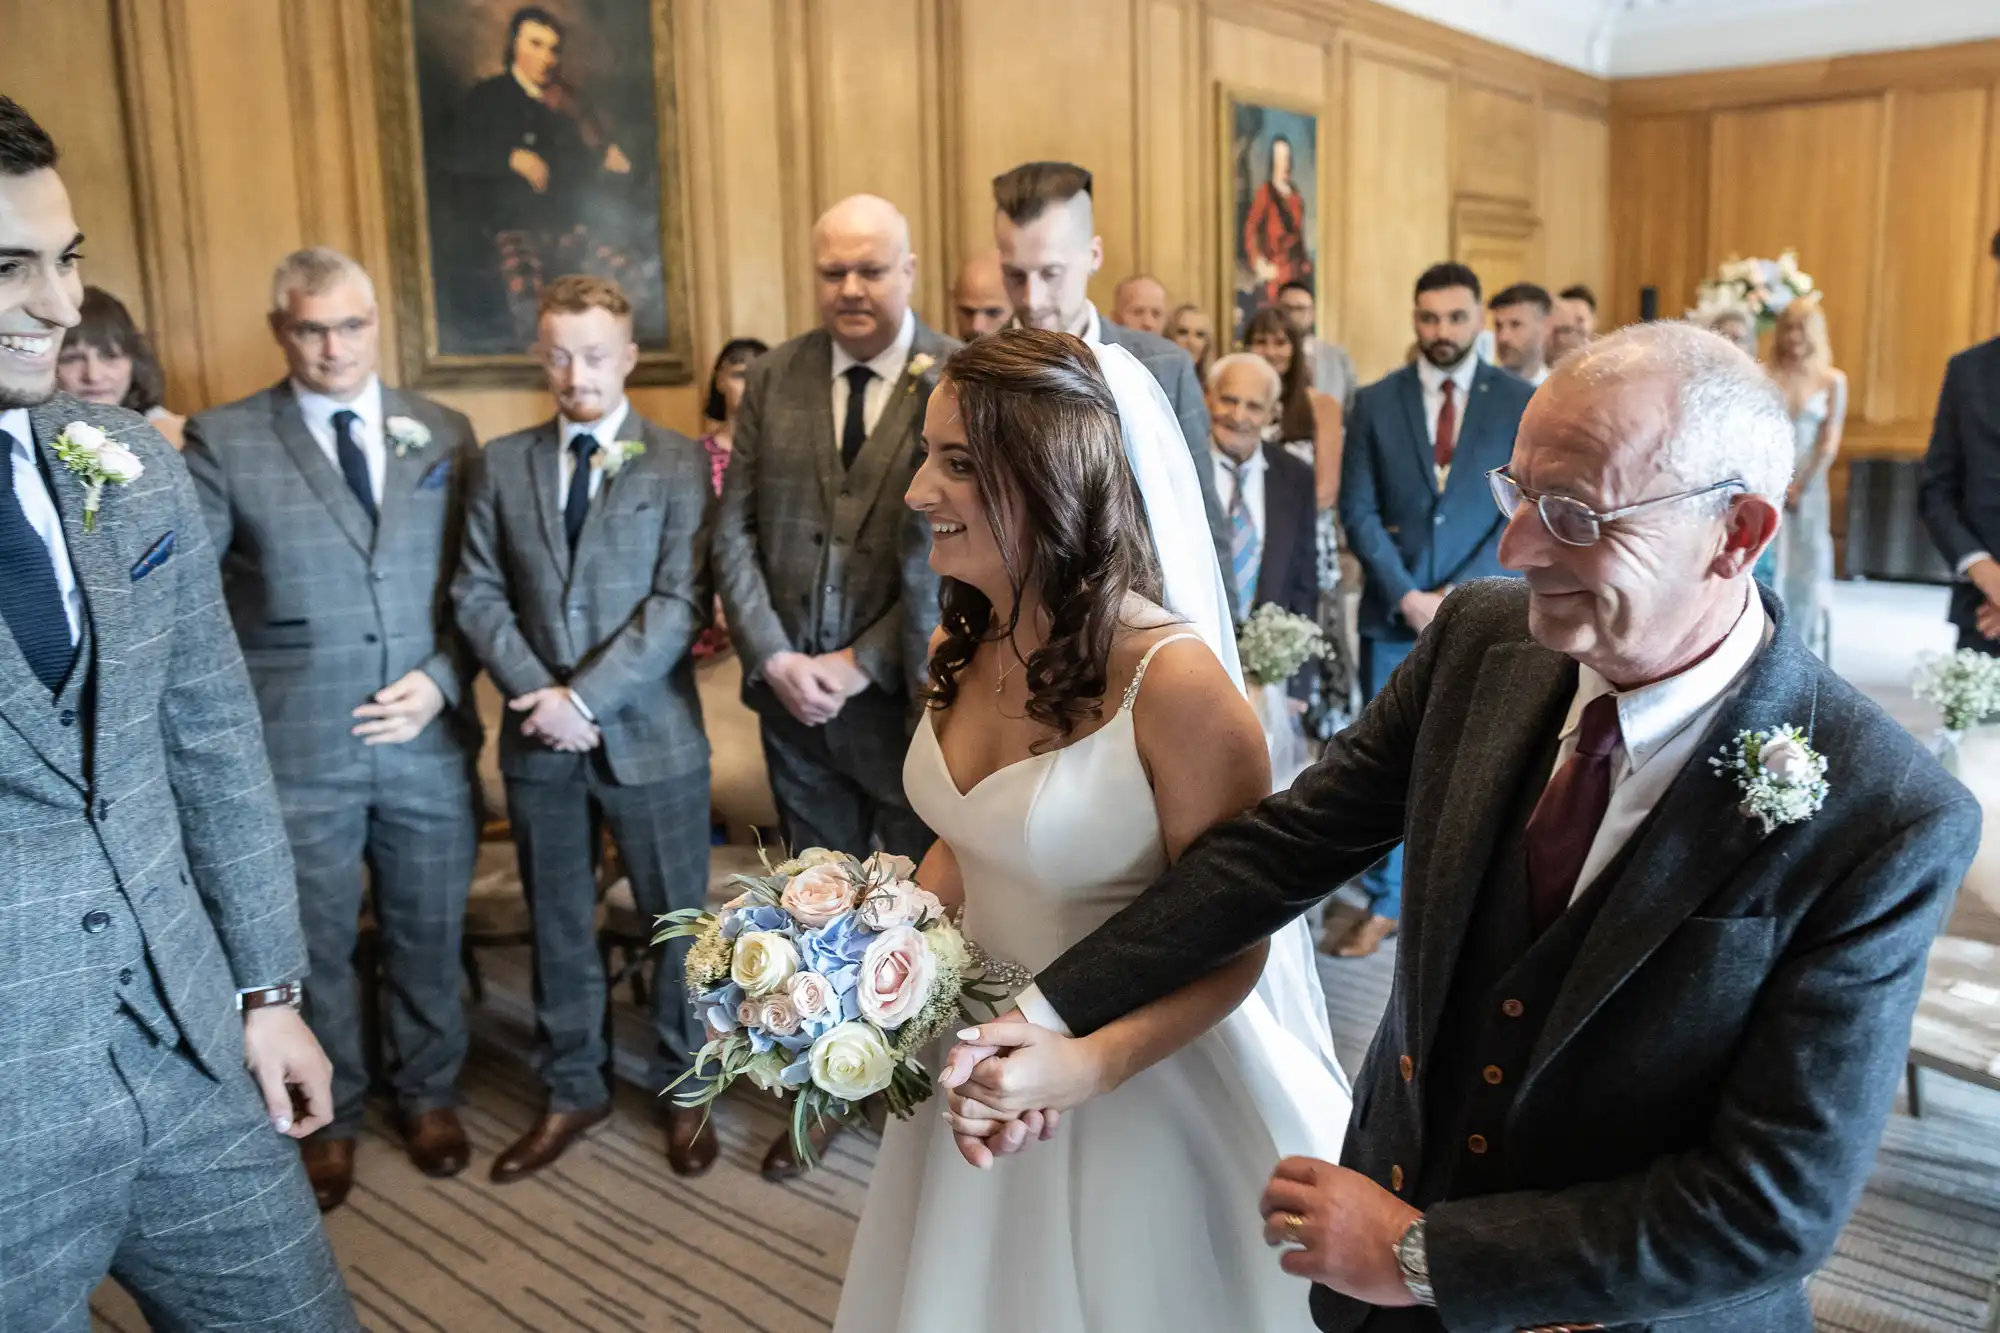 A bride and her father walking down the aisle, with guests looking on, in an indoor ceremonial setting.